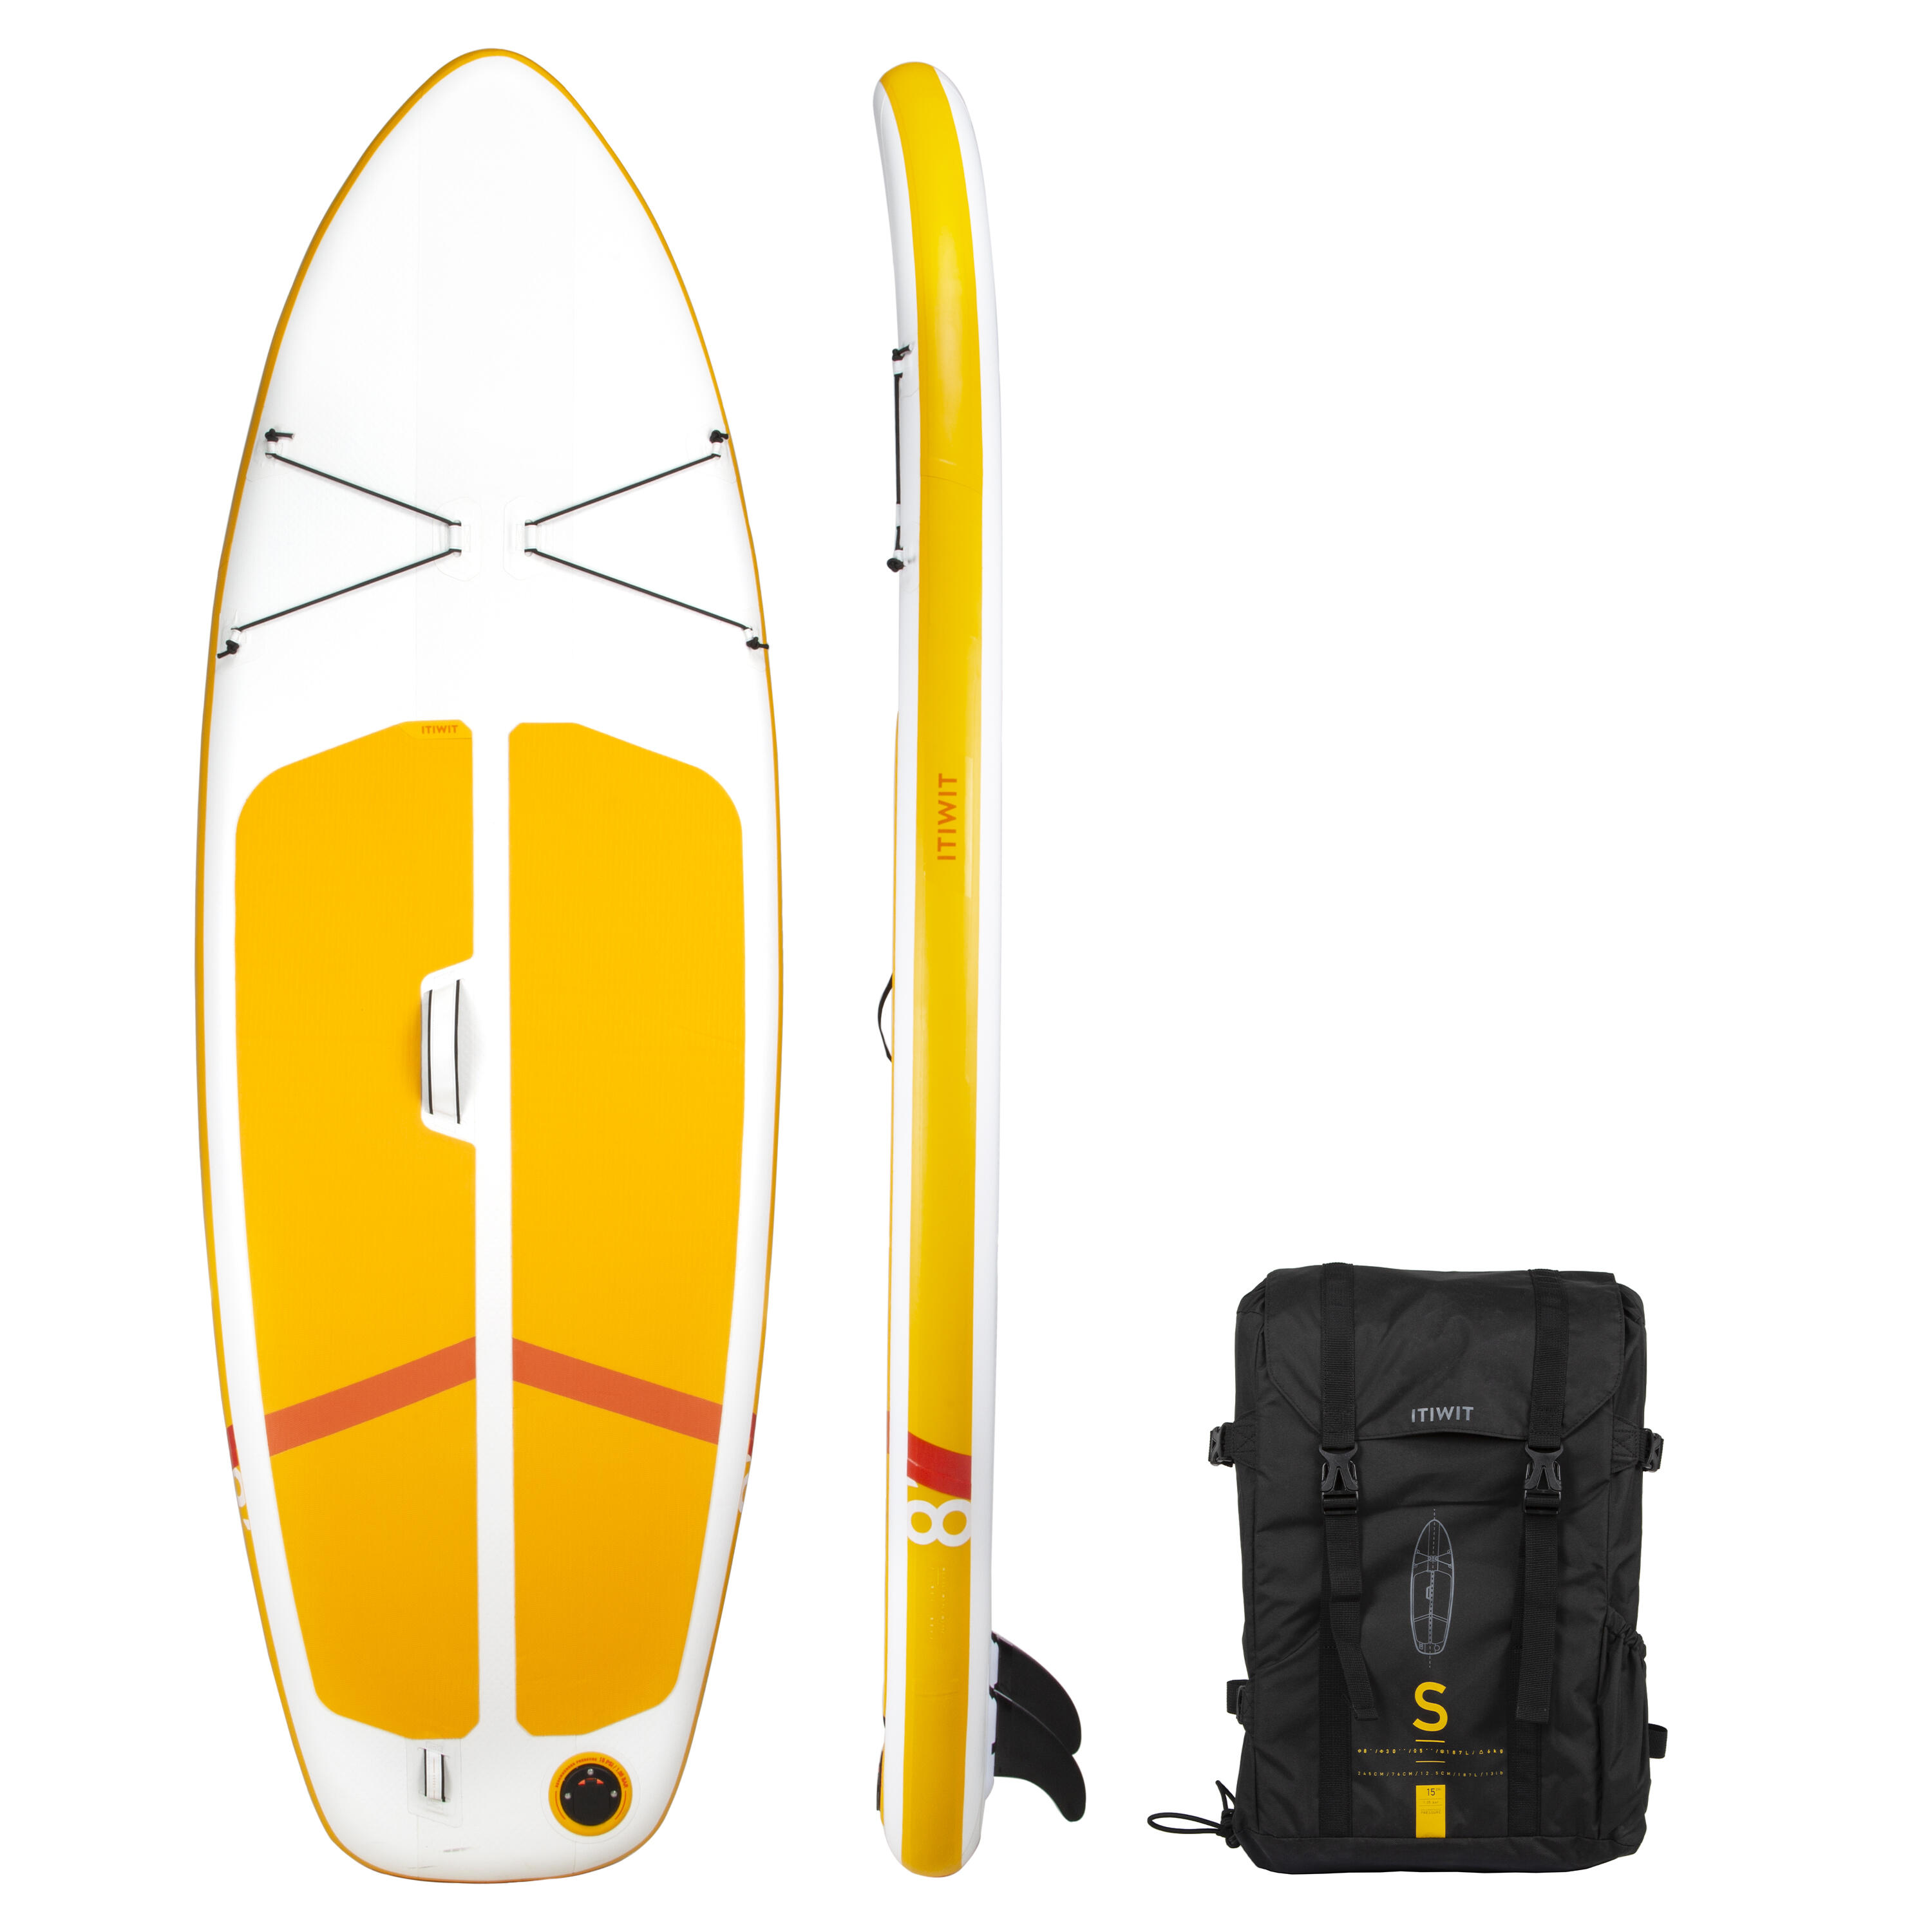 SUP gonflabil S Galben-Alb decathlon.ro  Placi Stand Up Paddle